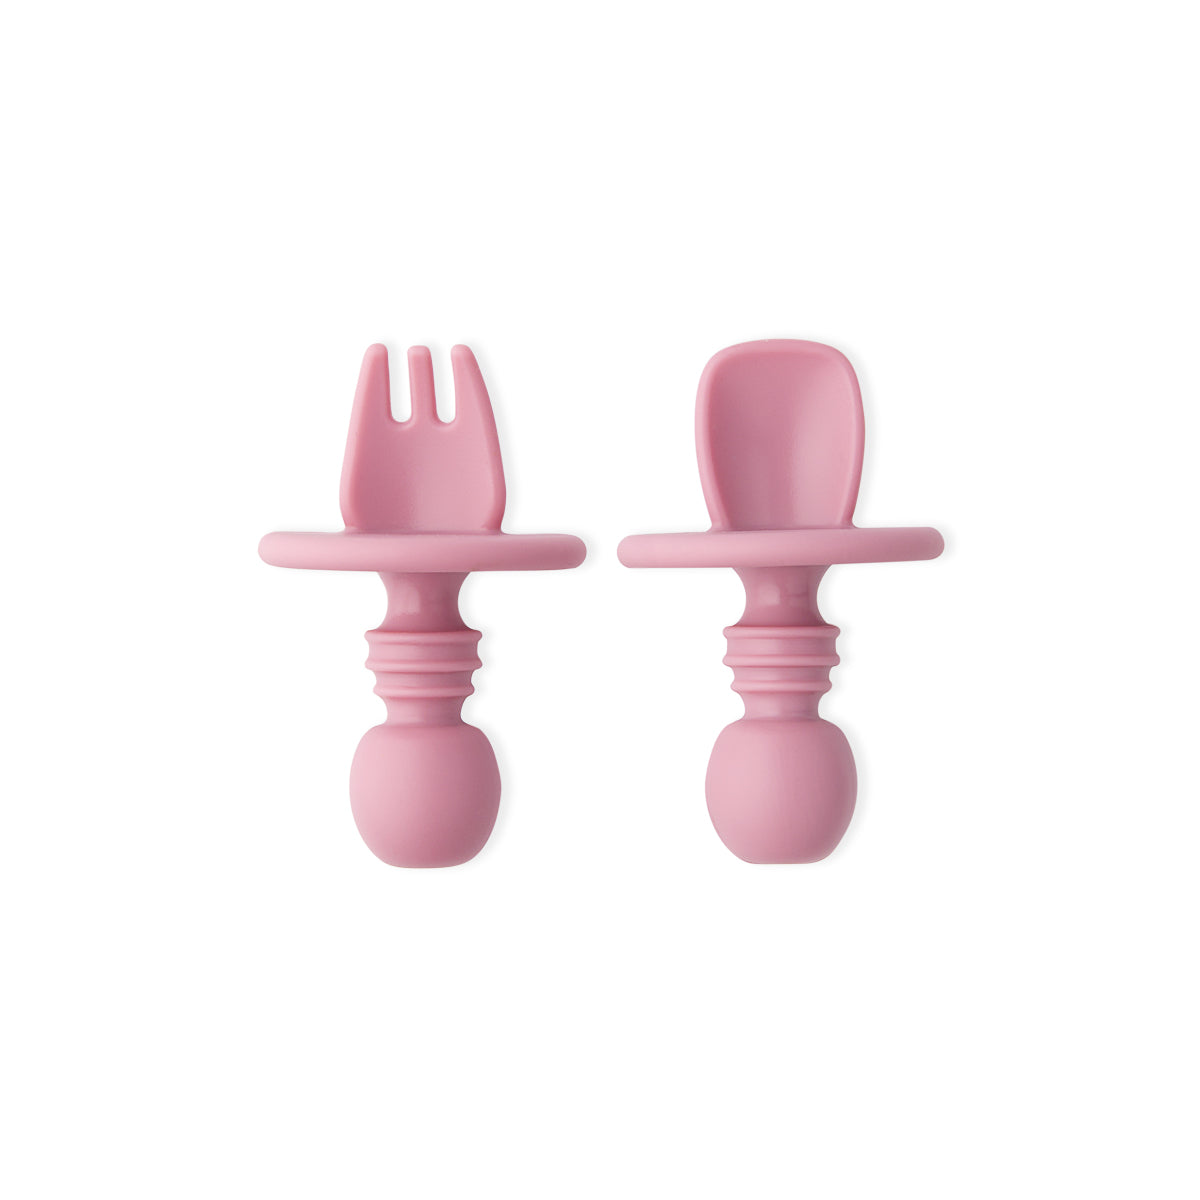 Small Fork and Spoon Set - Rose Blush